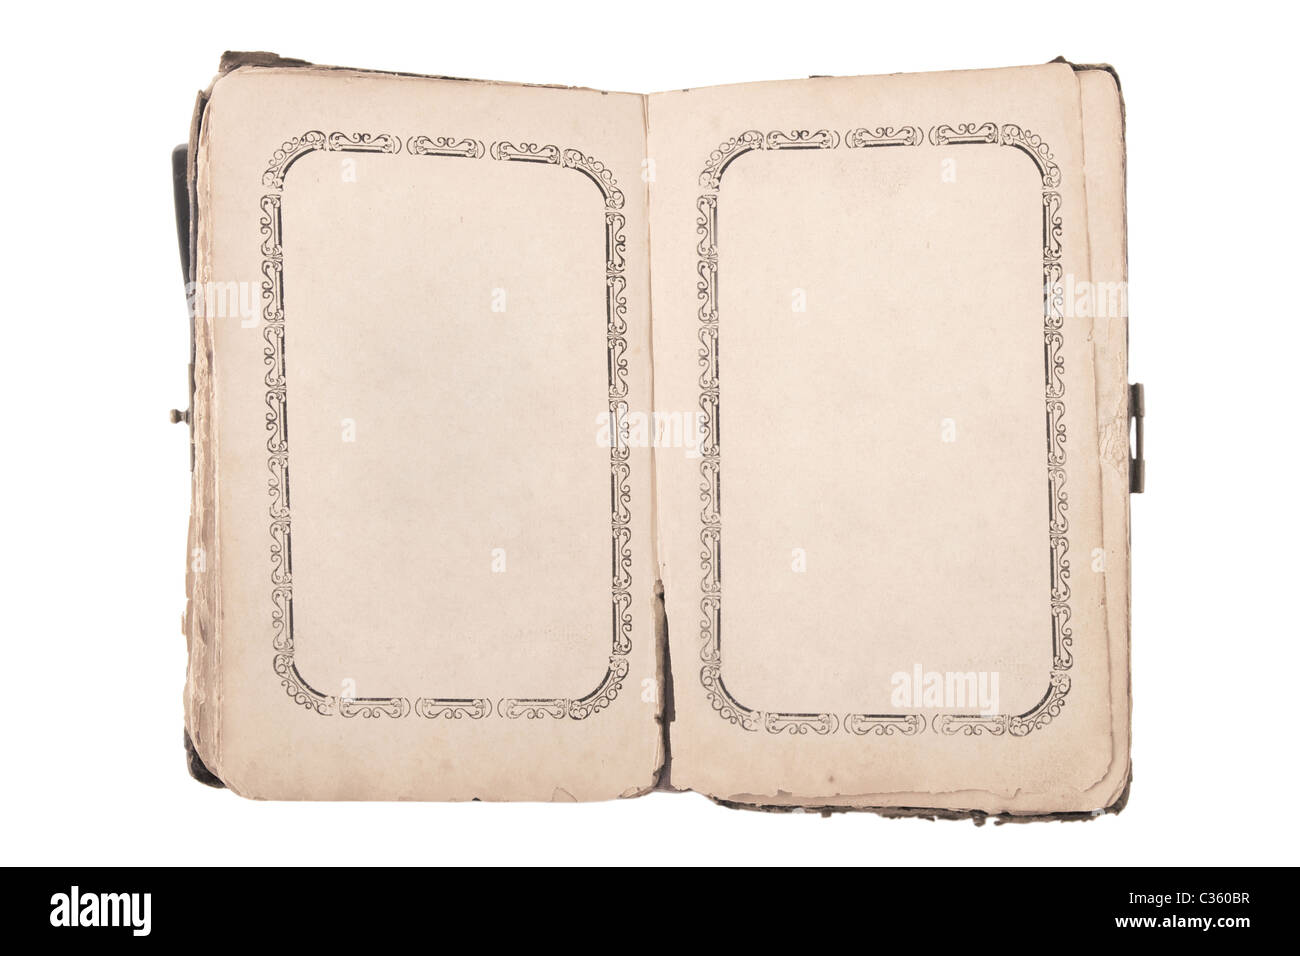 front view of old open book with blank pages Stock Photo